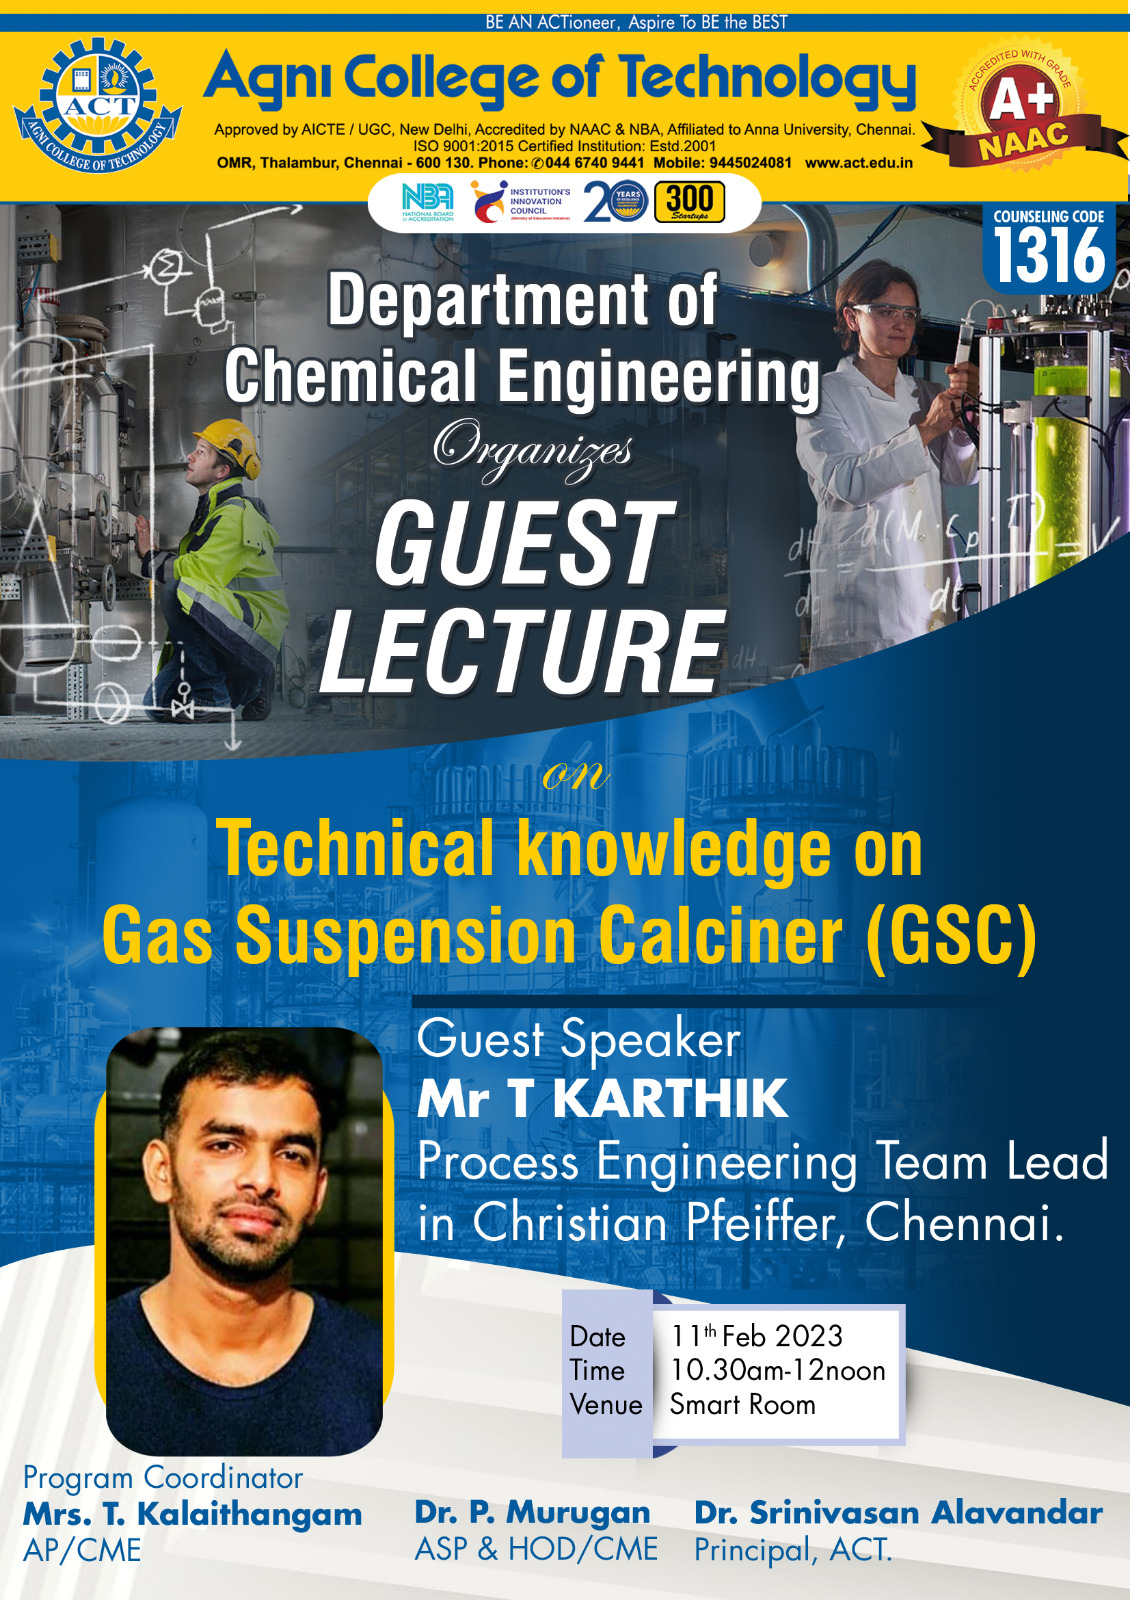 Guest Lecture on Technical Knowledge on Gas Suspension Calciner (GSC)